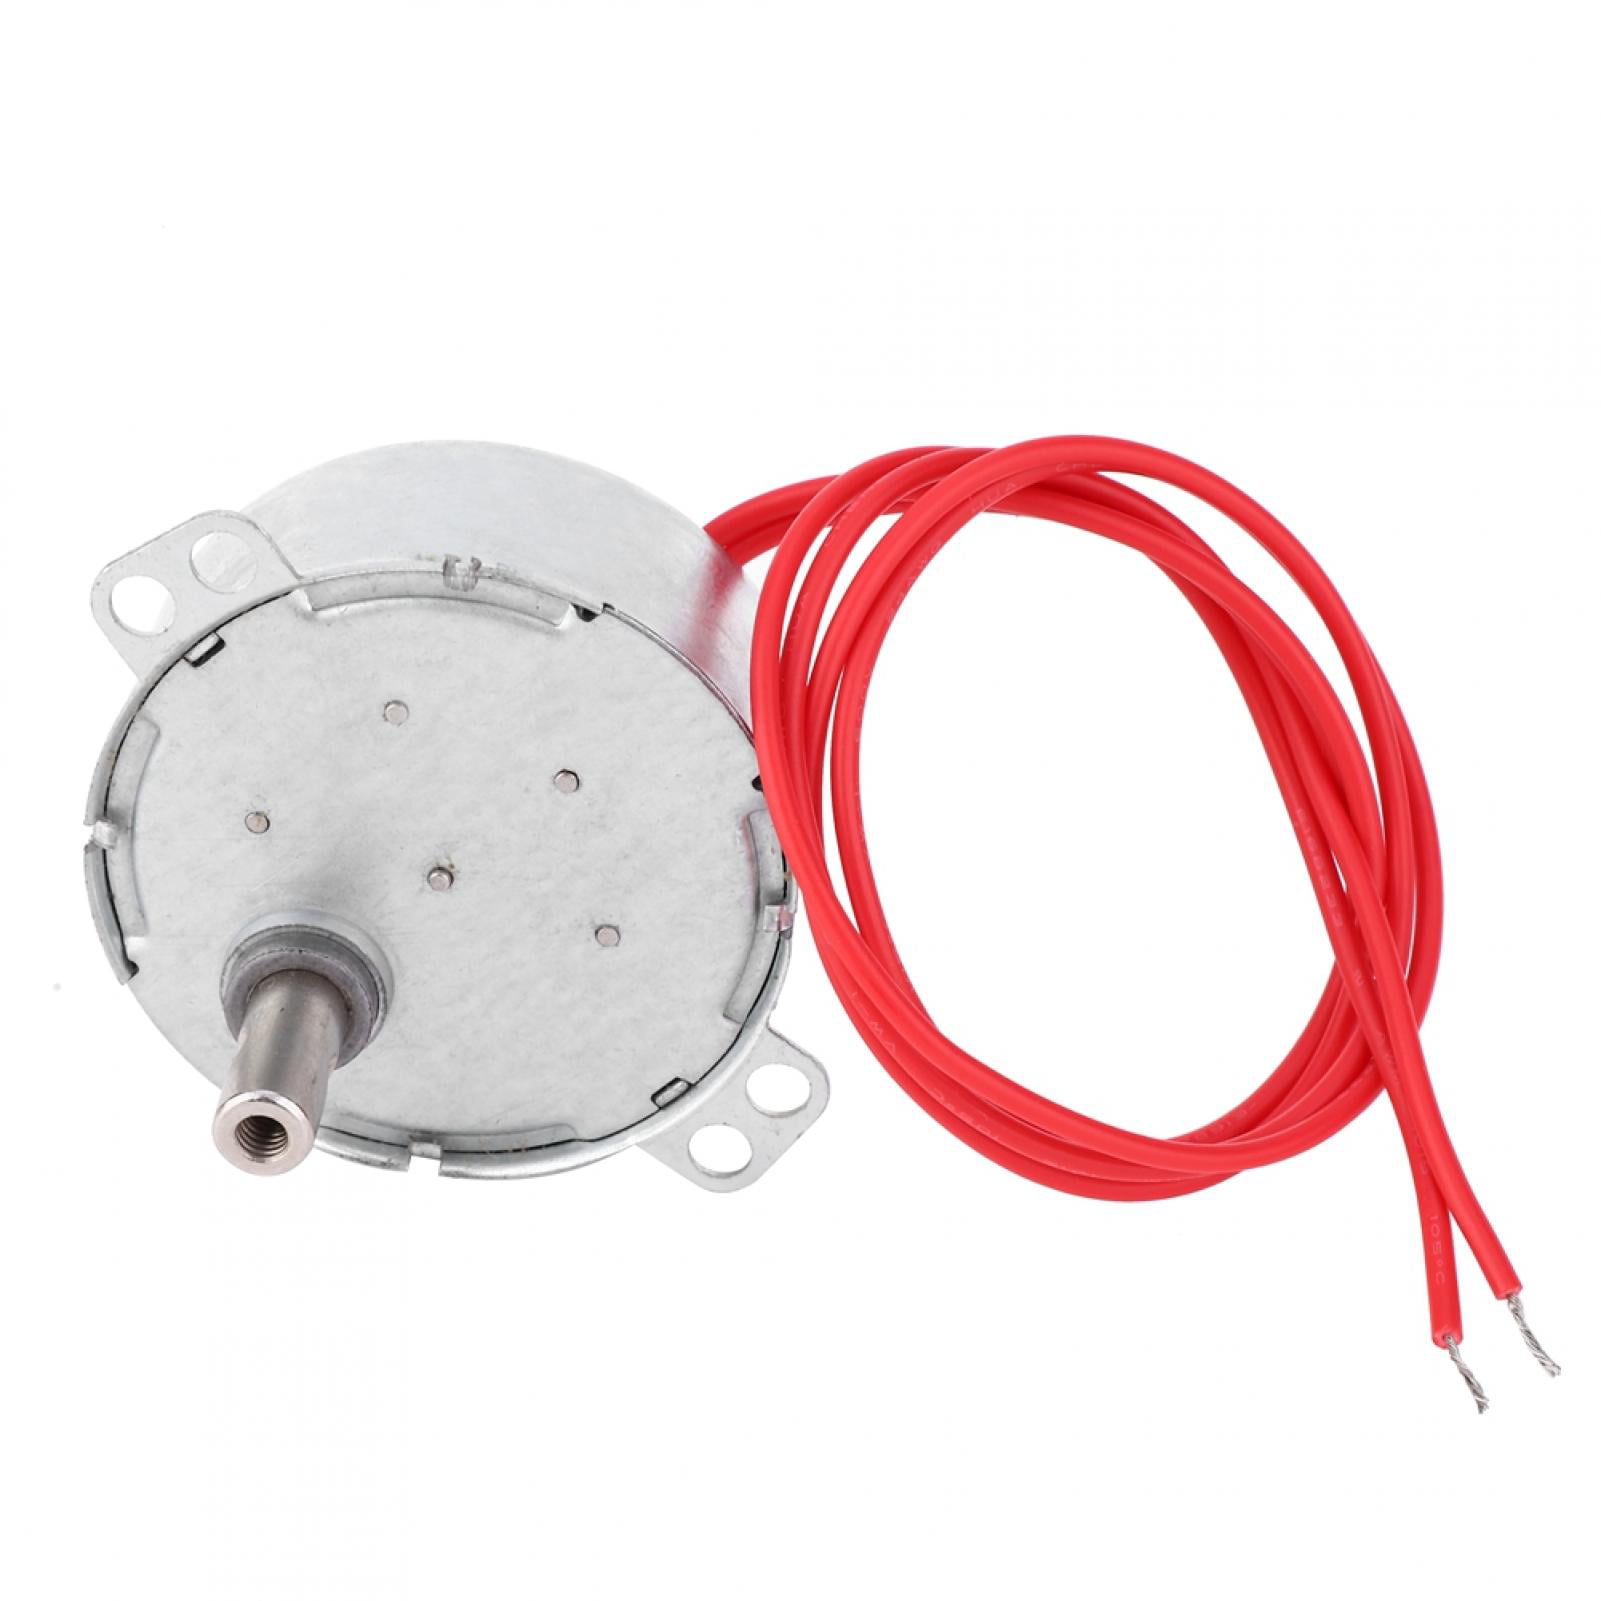 Synchronous Motor TYC30 12V AC 5/6RPM CW/CCW Small Electric Motor For Decoration 